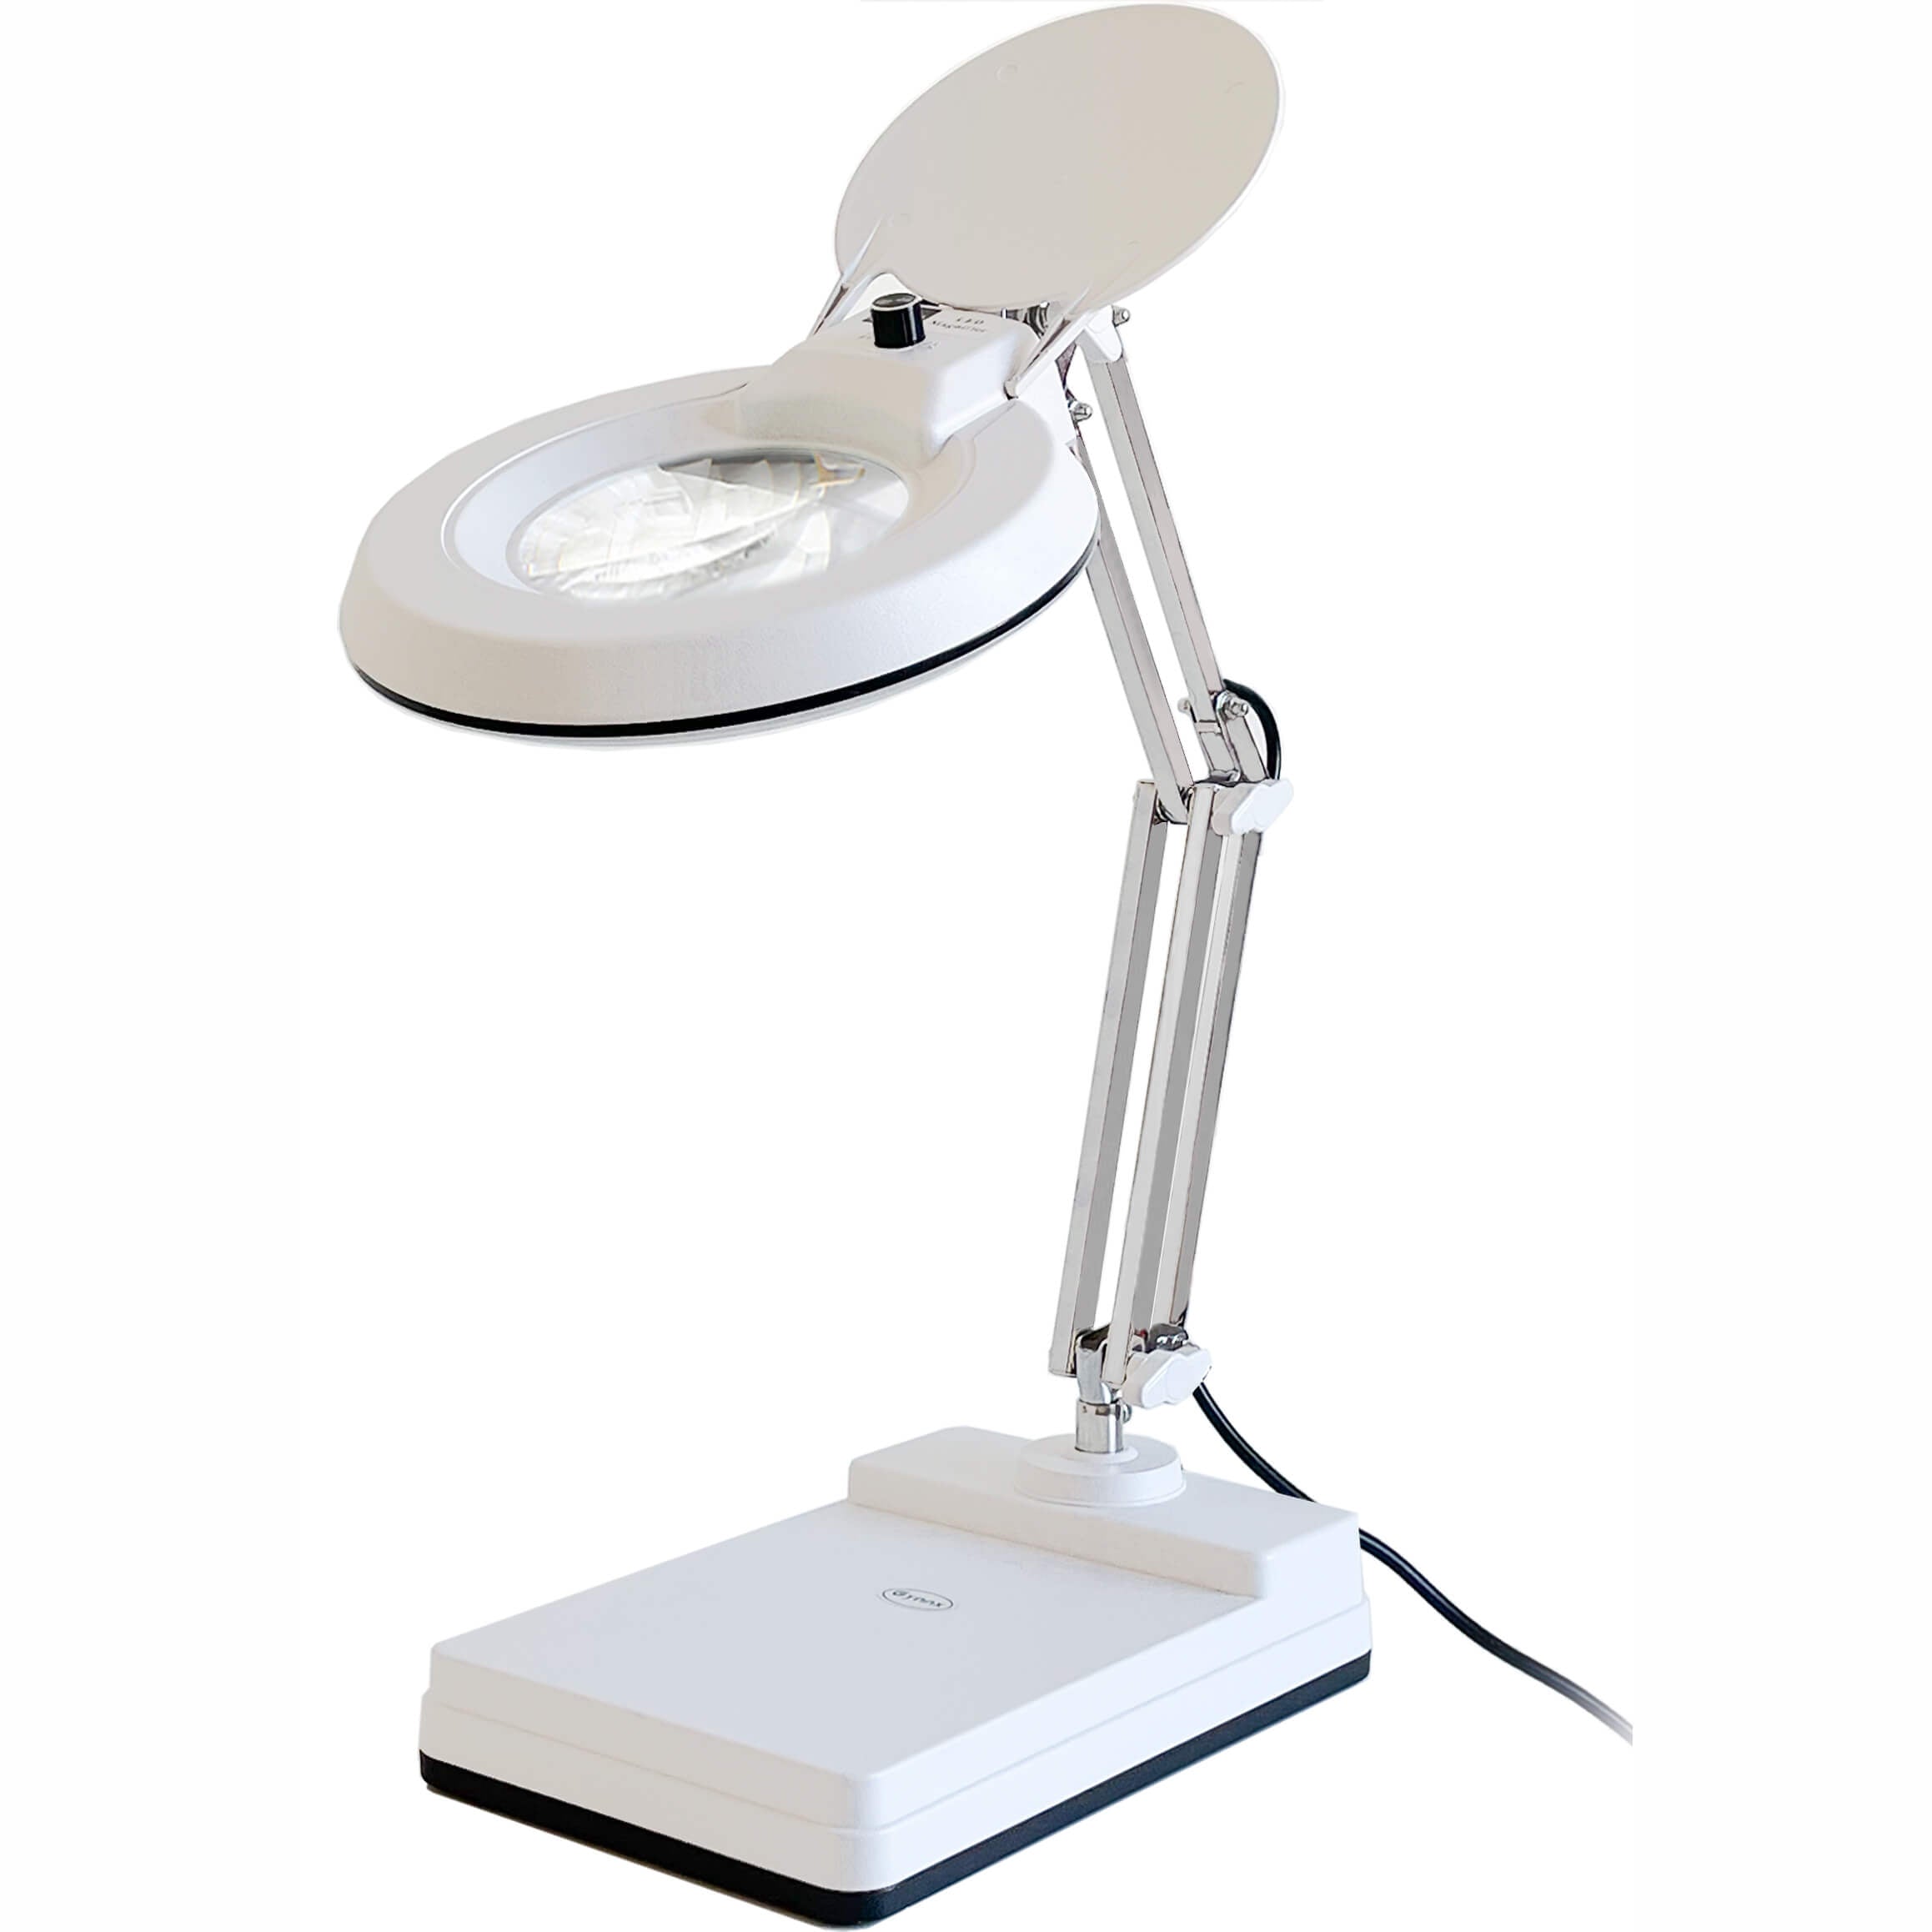 Gynnx Magnifying Lamp, Dimmable 10x Magnifying Desk Lamp, 120 Pcs LED and 5 Inches Lens with Stainless Steel Arm (White)